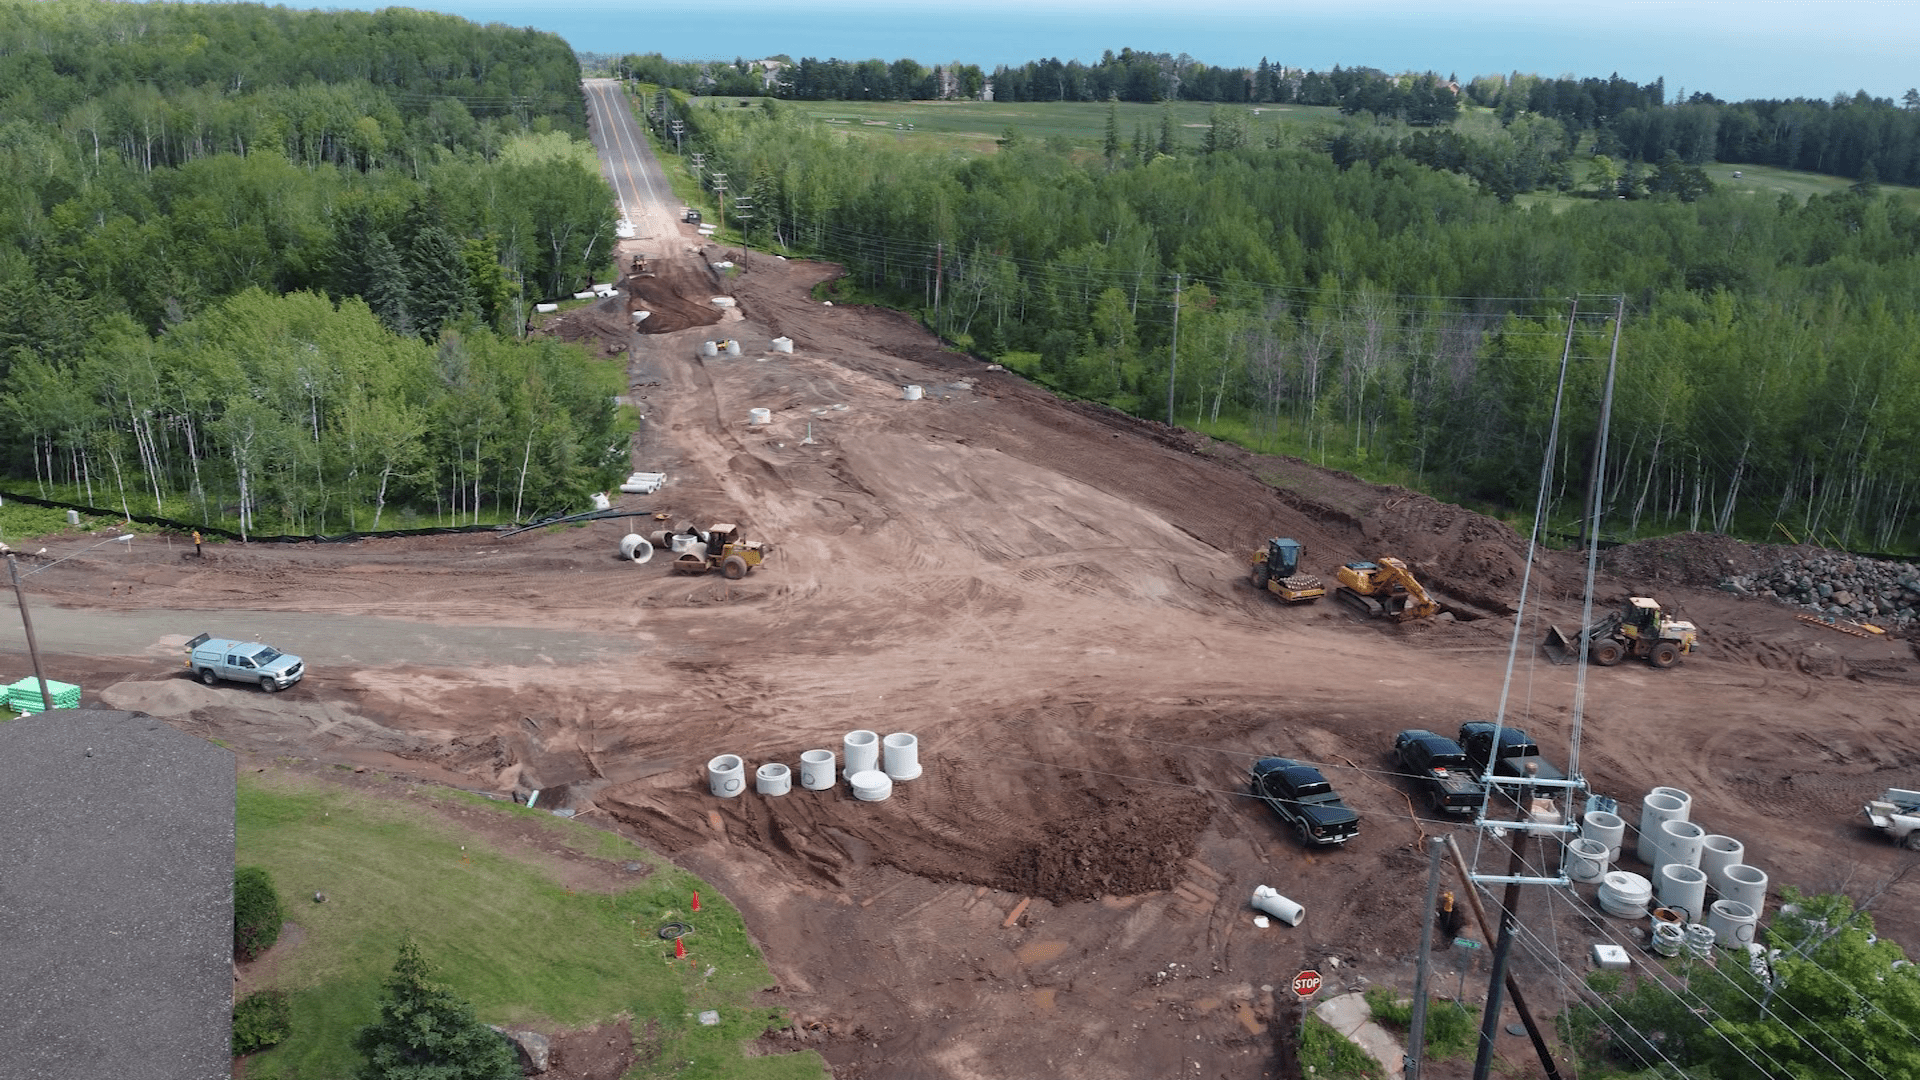 Ariel View Drone Glenwood Street Roundabout Construction (WDIO)